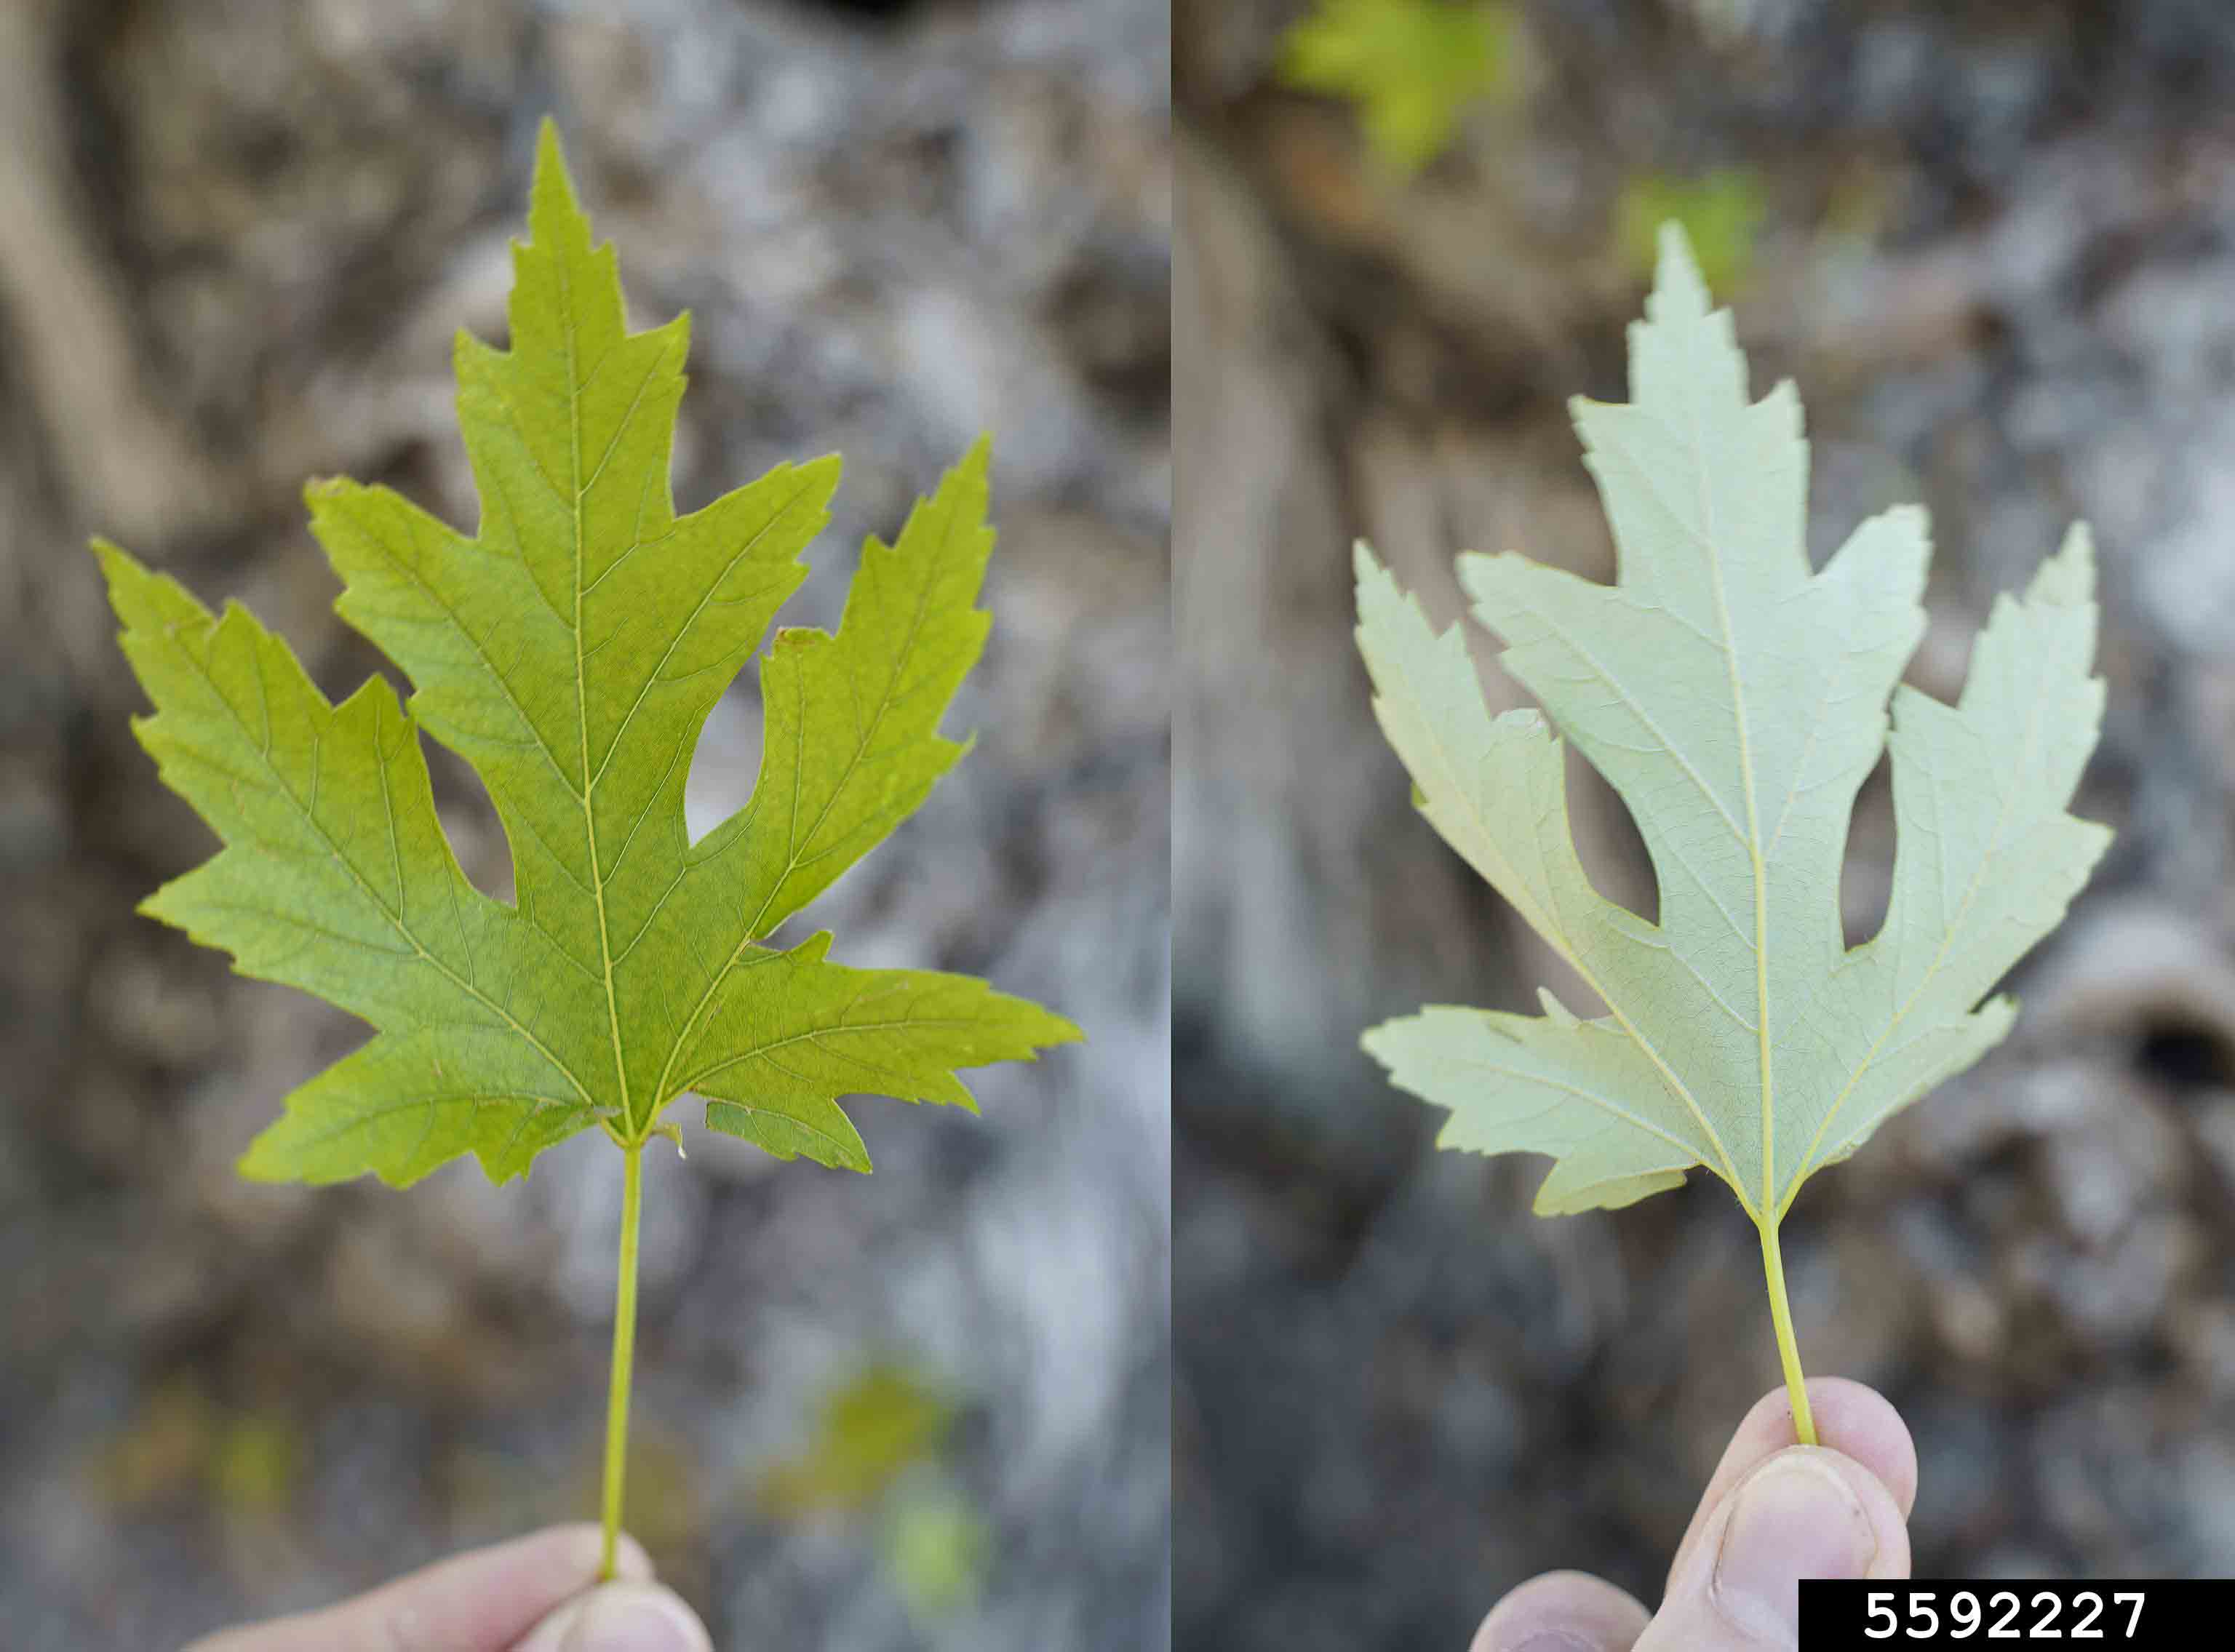 Silver maple leaves, showing upper side and silver underside